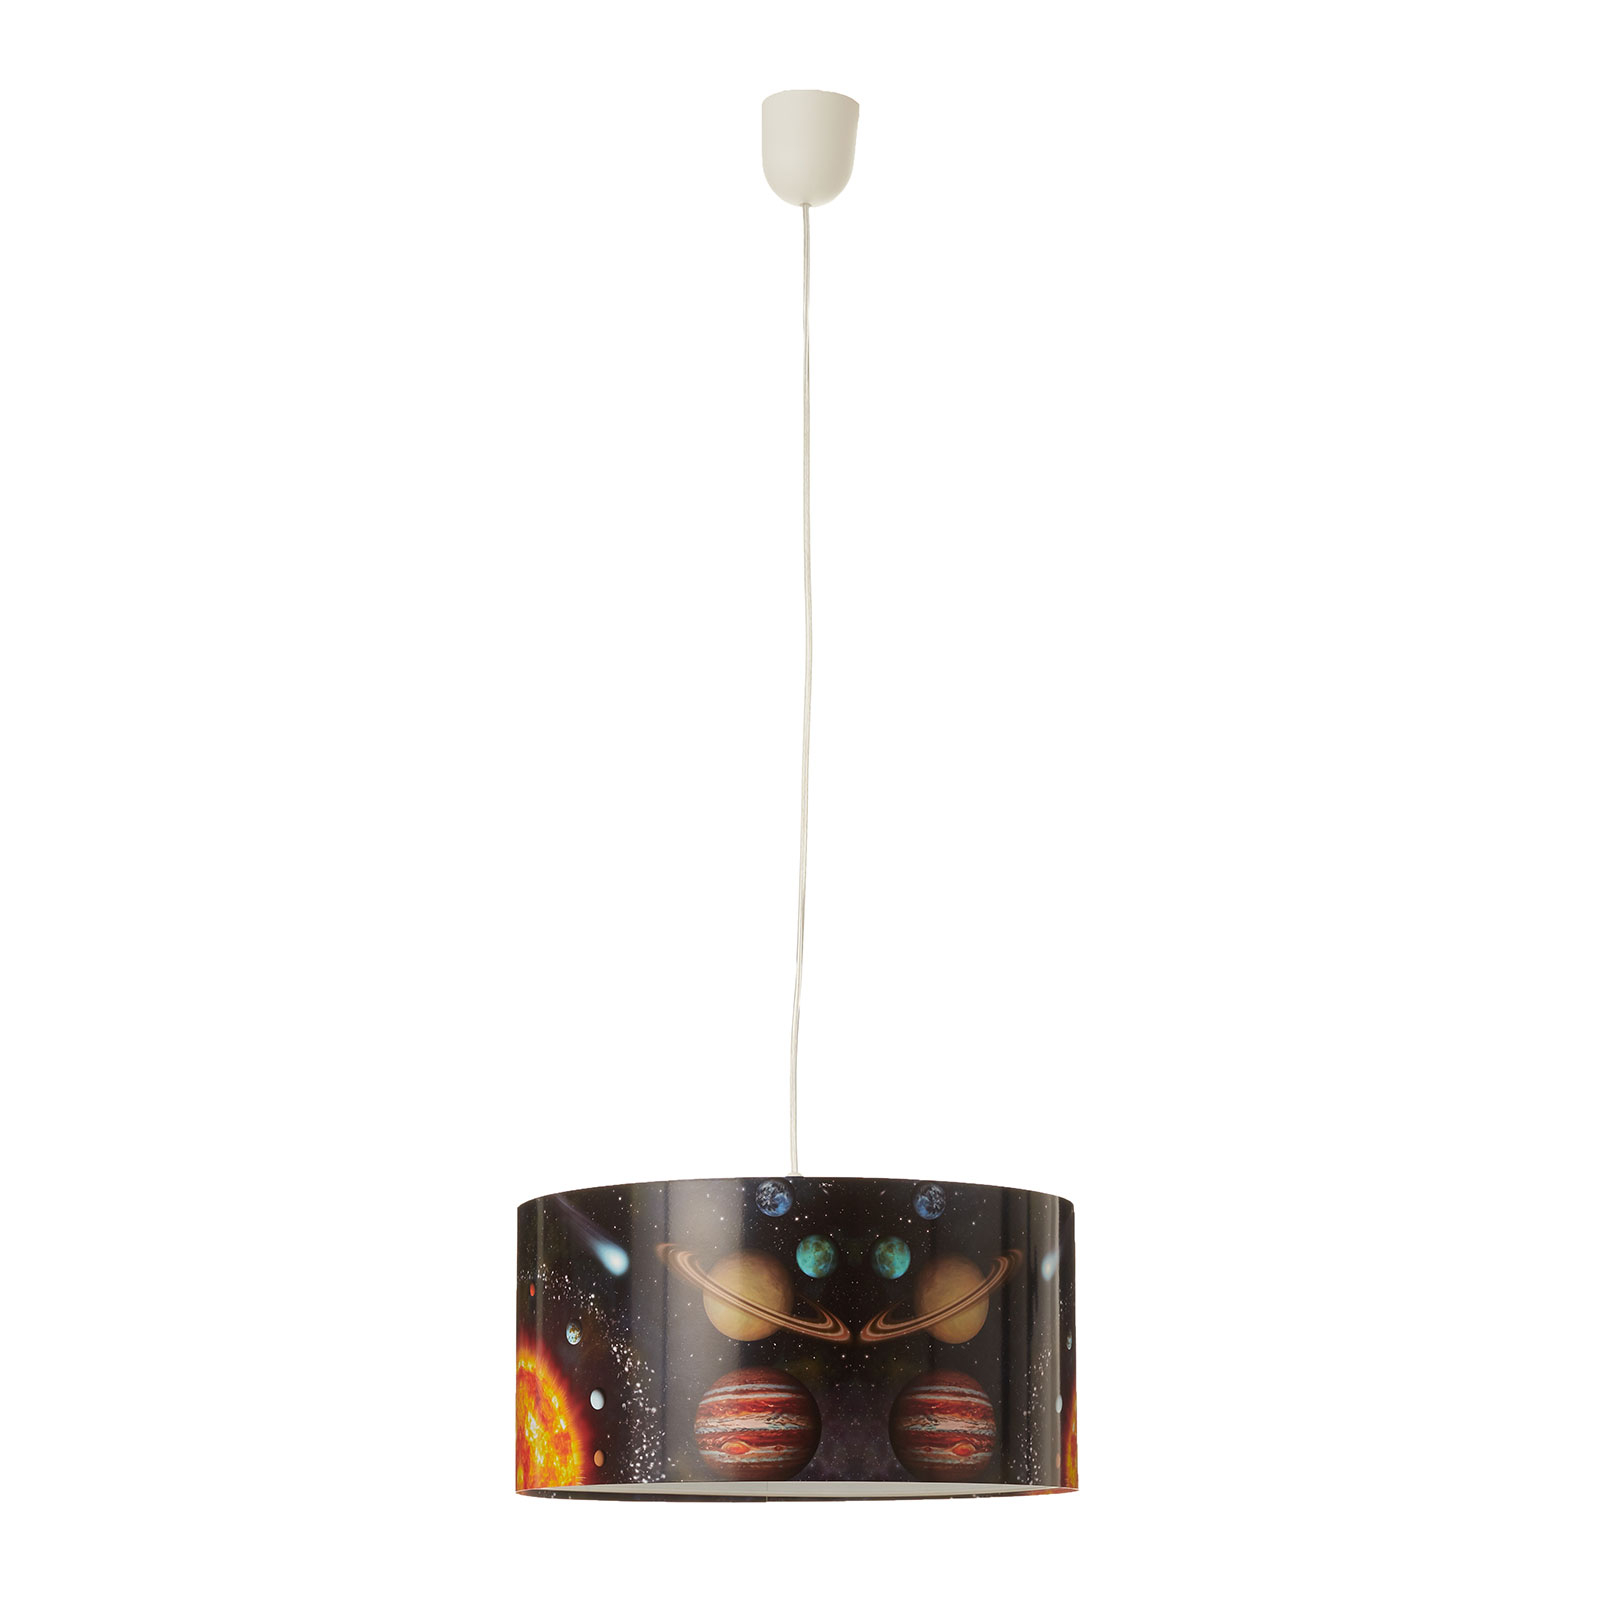 Space pendant light with space print